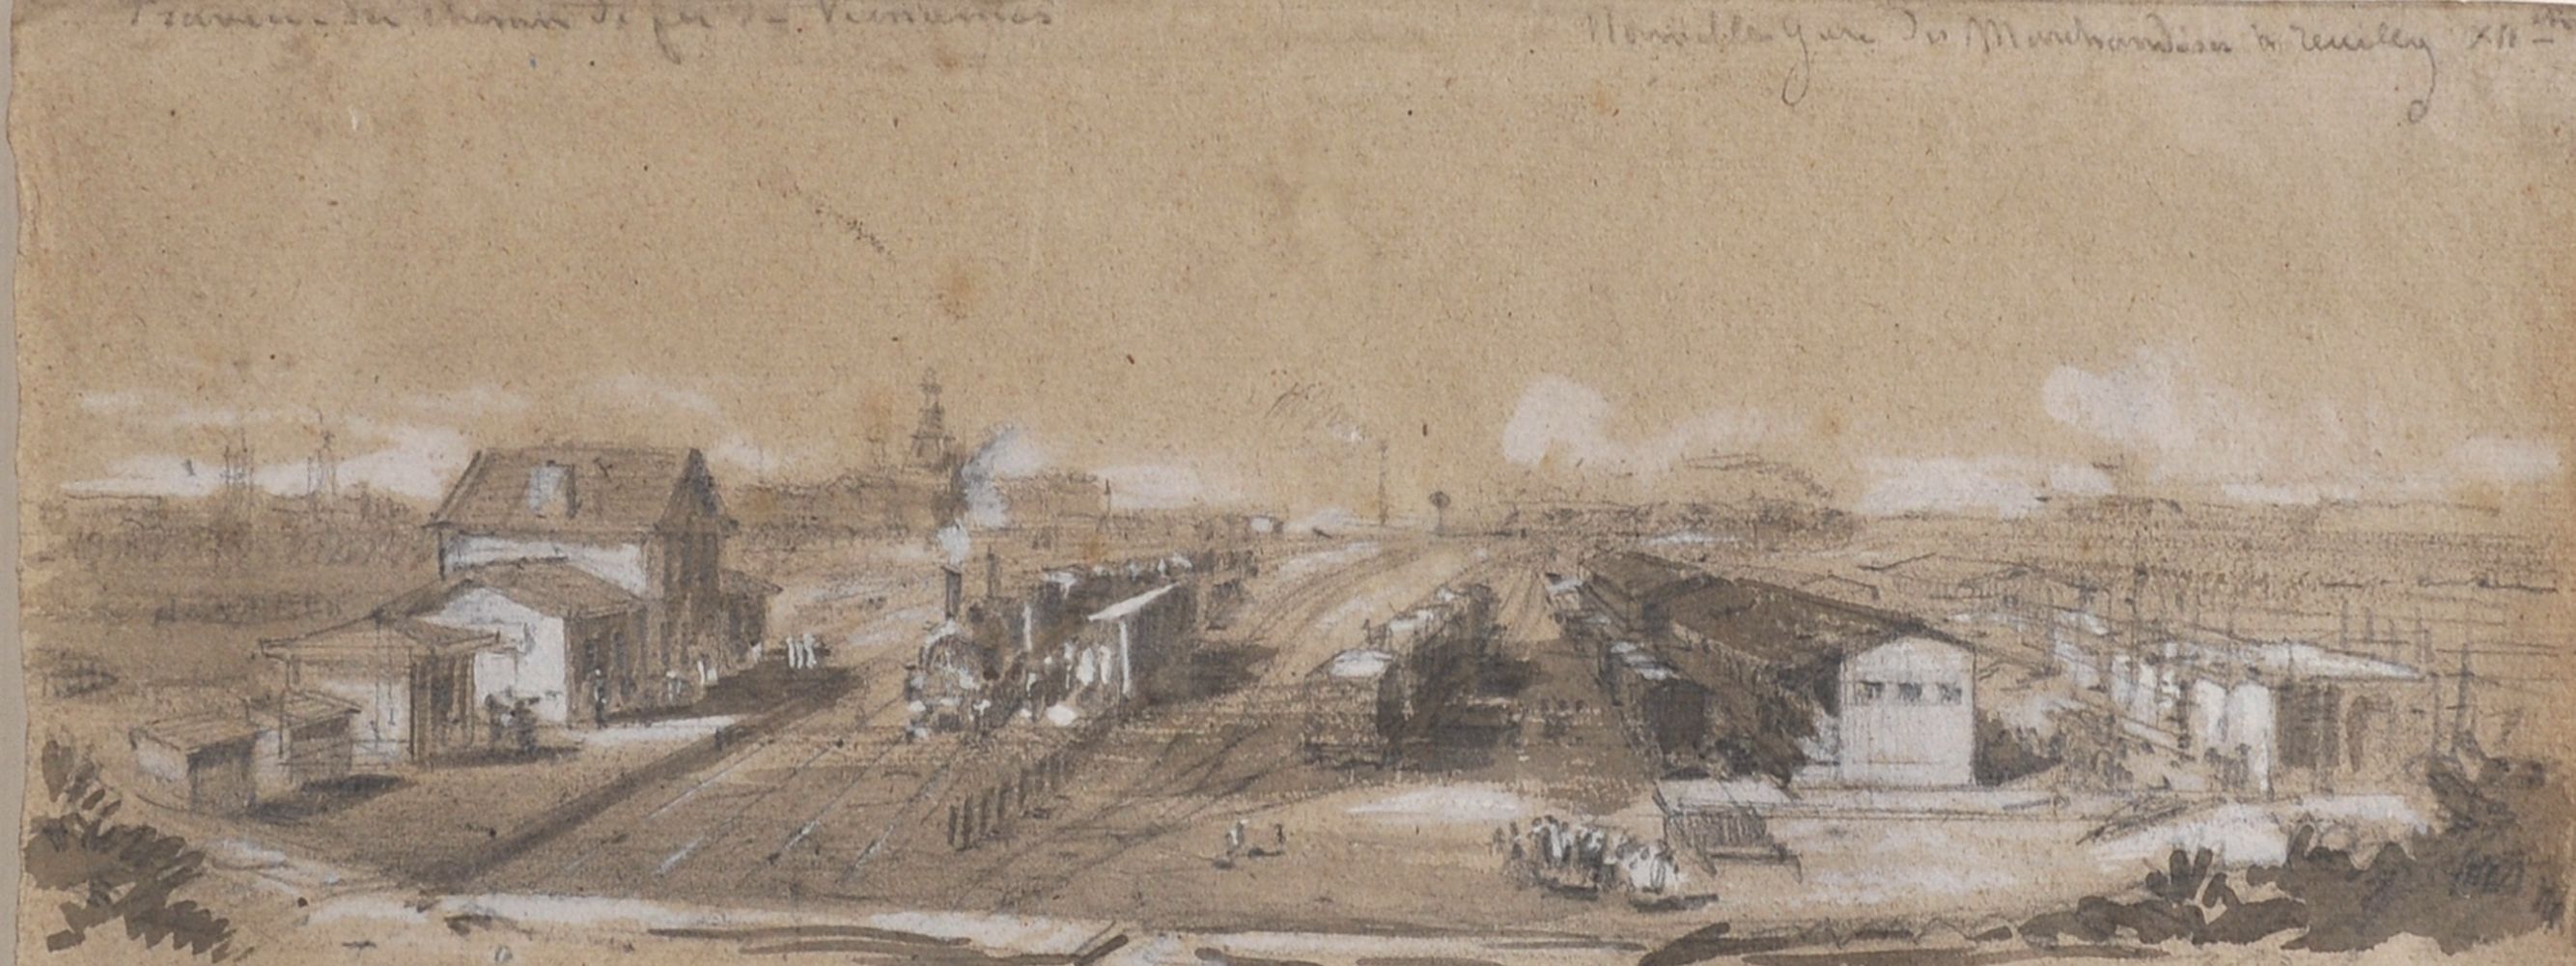 19th Century French School. "Nouvelle Gare de Marchandise, Reuilly, XII e", Study of a Train